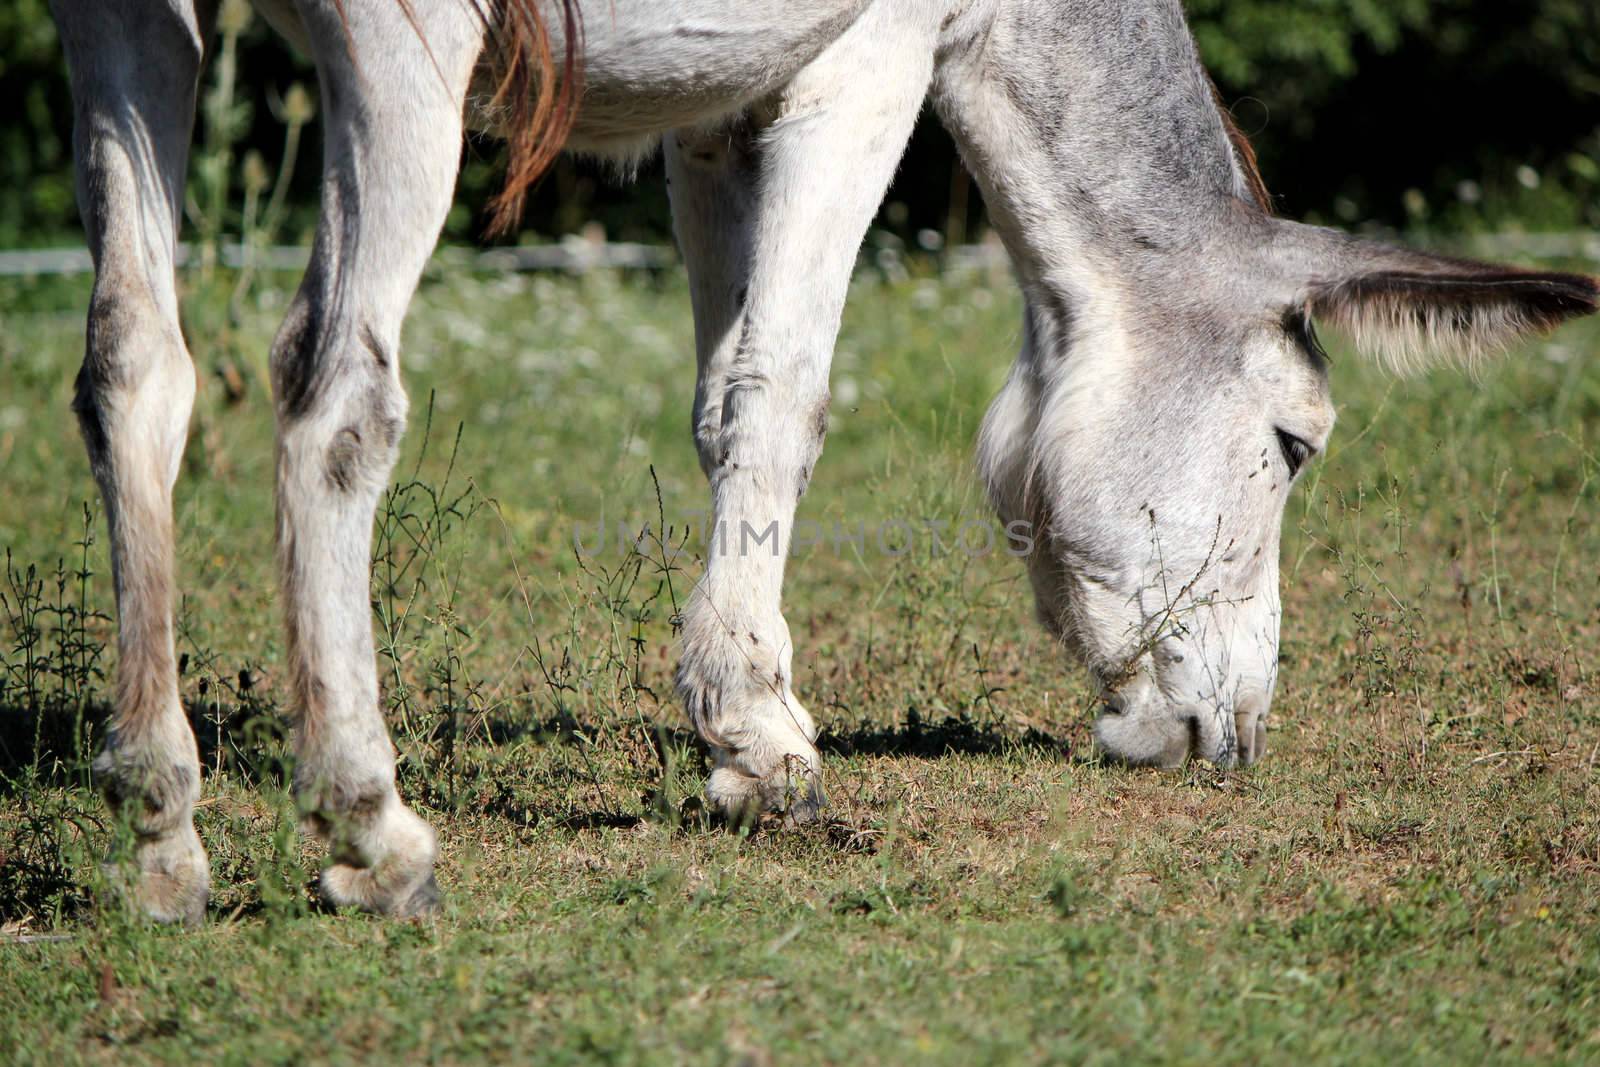 A grey donkey eating the grass